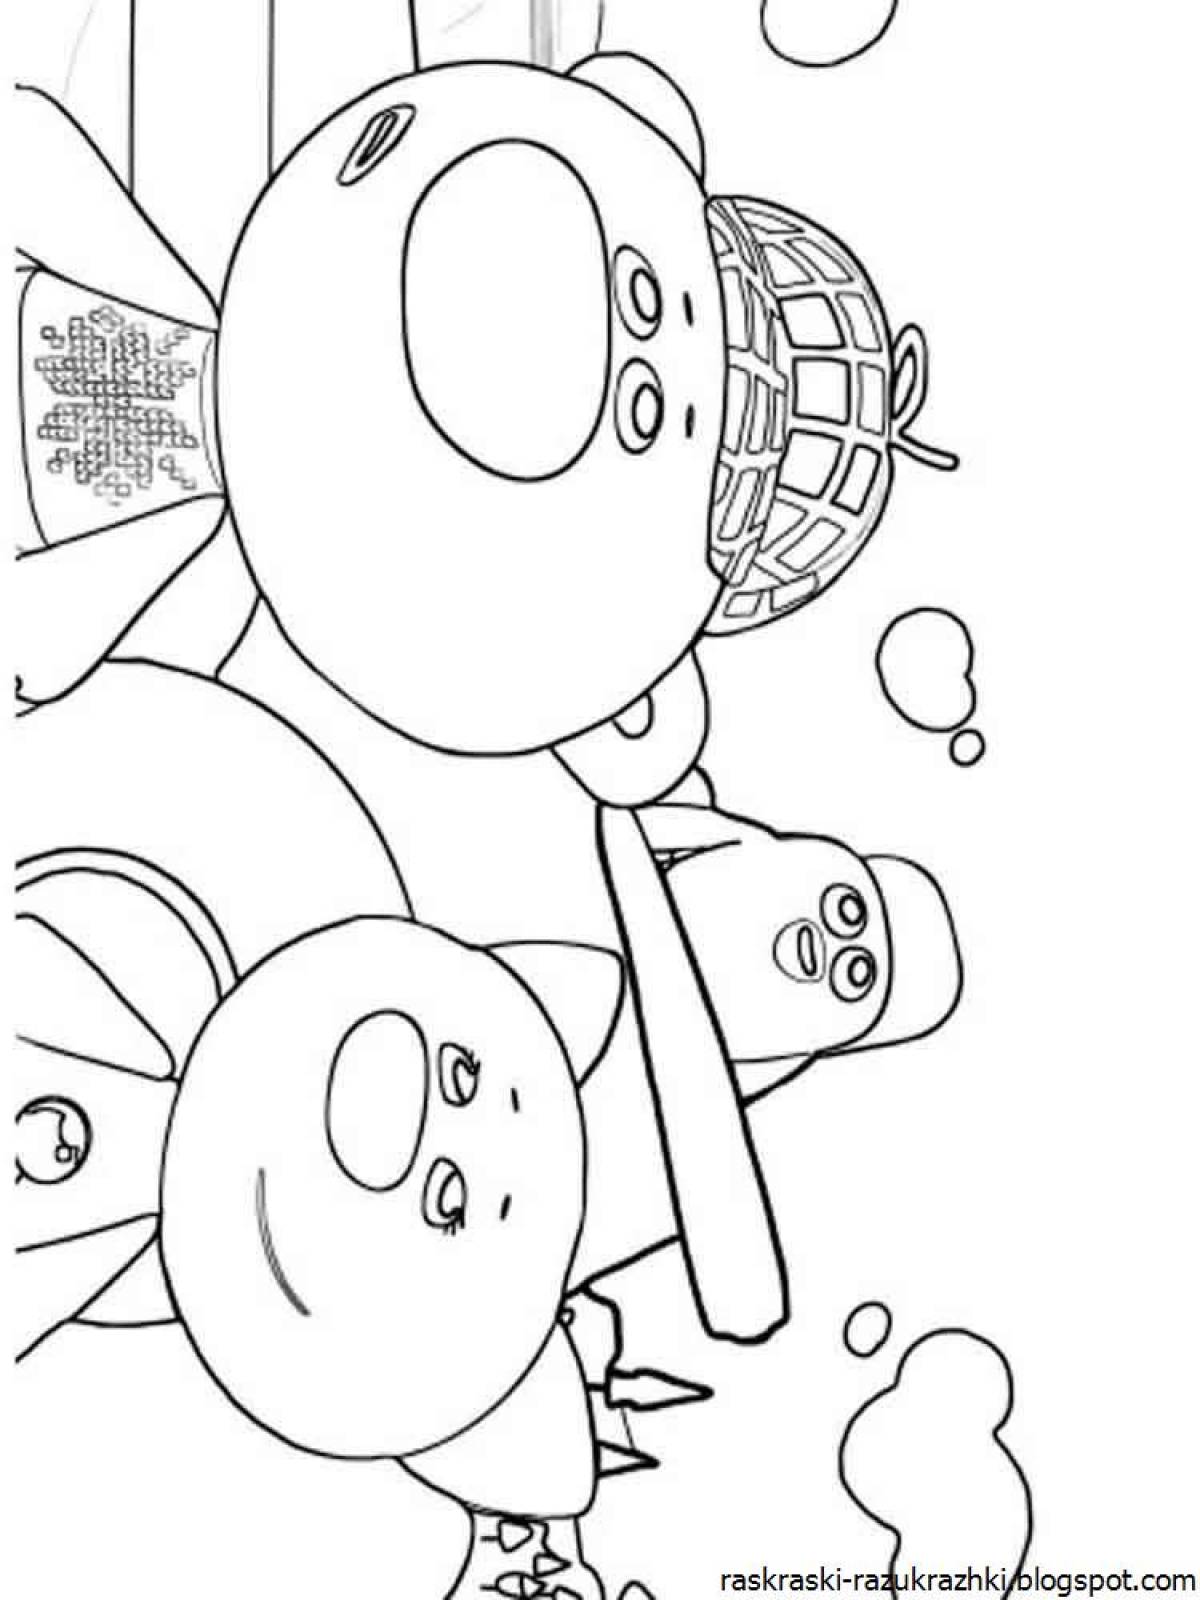 Cuddlable coloring pages